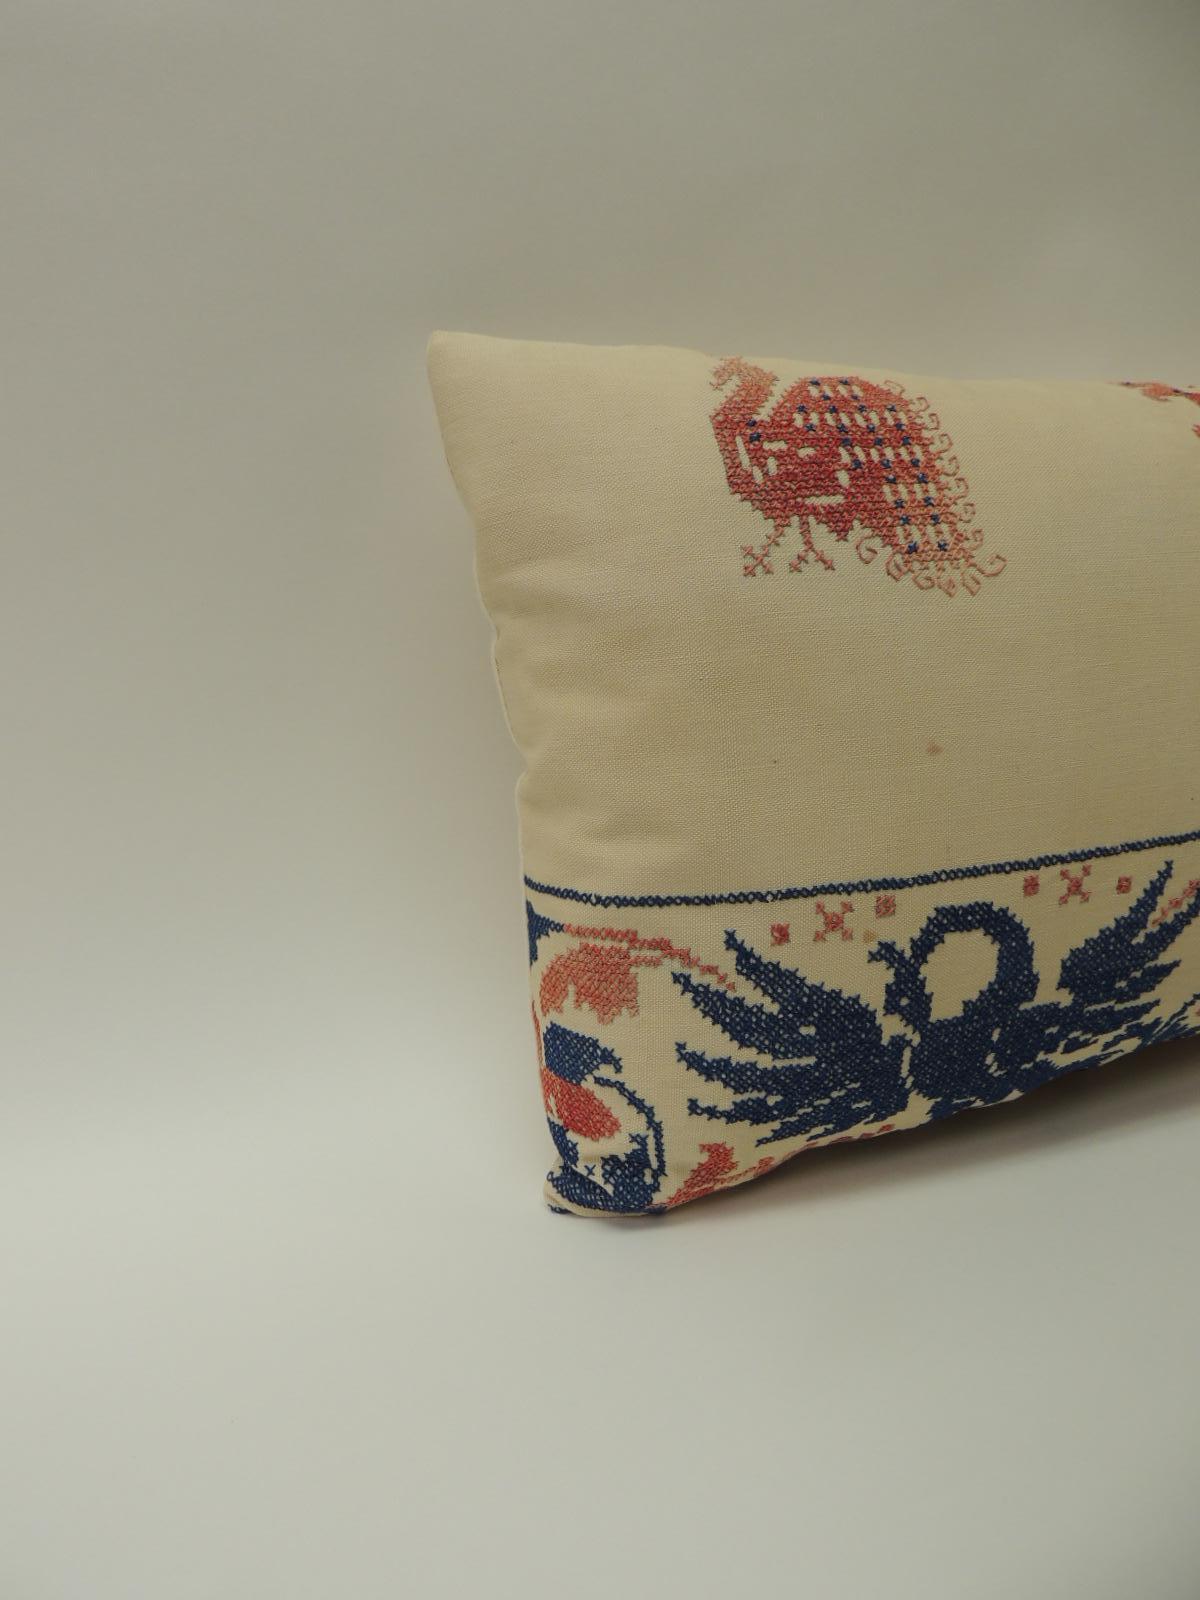 Red, blue and natural Greek Isle embroidered bolster’ pillow depicting embroidered birds and flowers (cross stitched) pattern; Decorative pillow finished in linen backing. Antique textile panel in shades of red, blue and natural. Decorative pillows